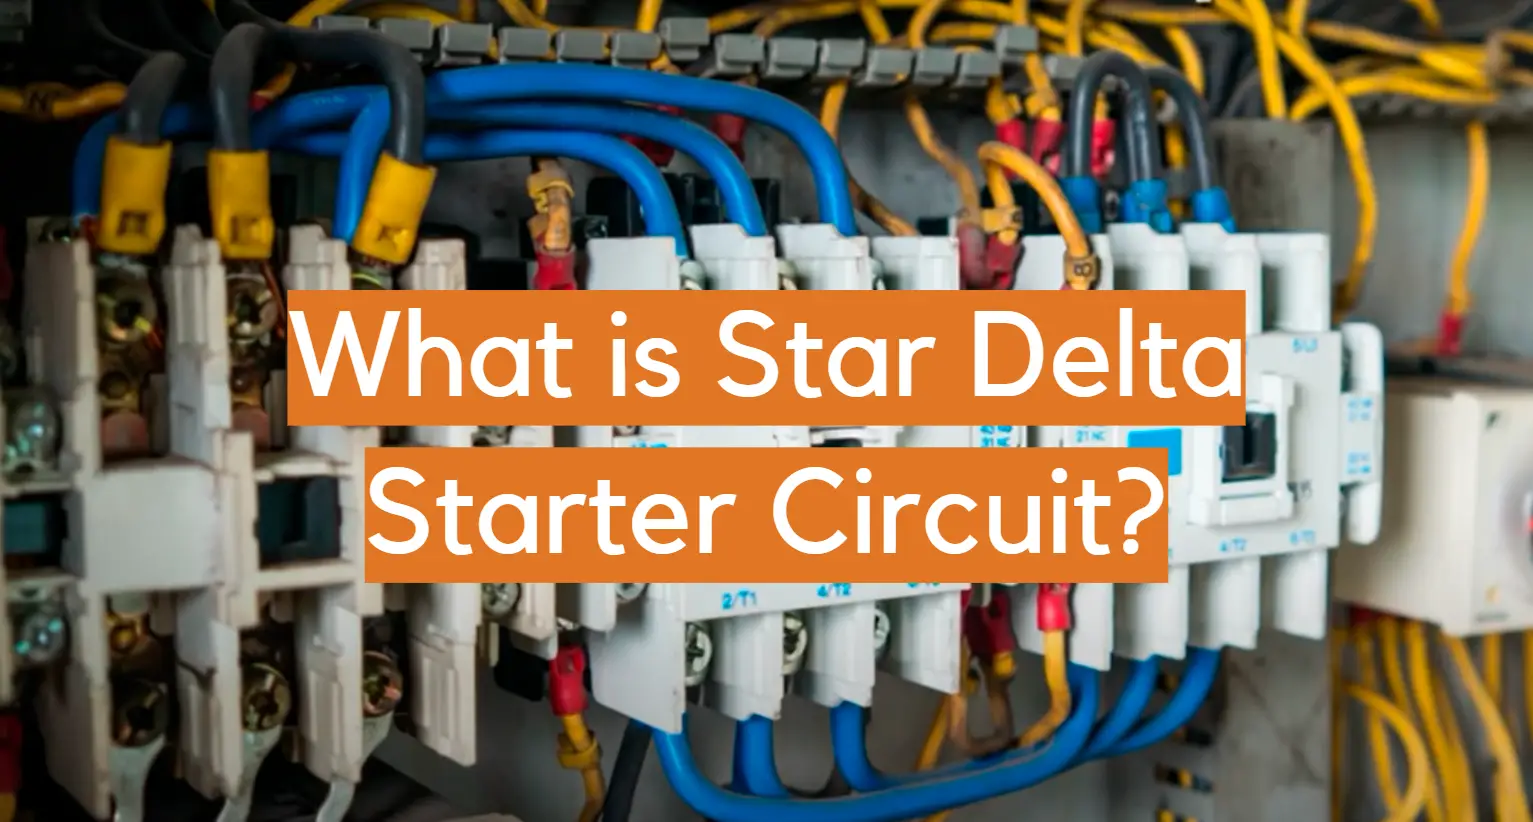 What is Star Delta Starter Circuit?